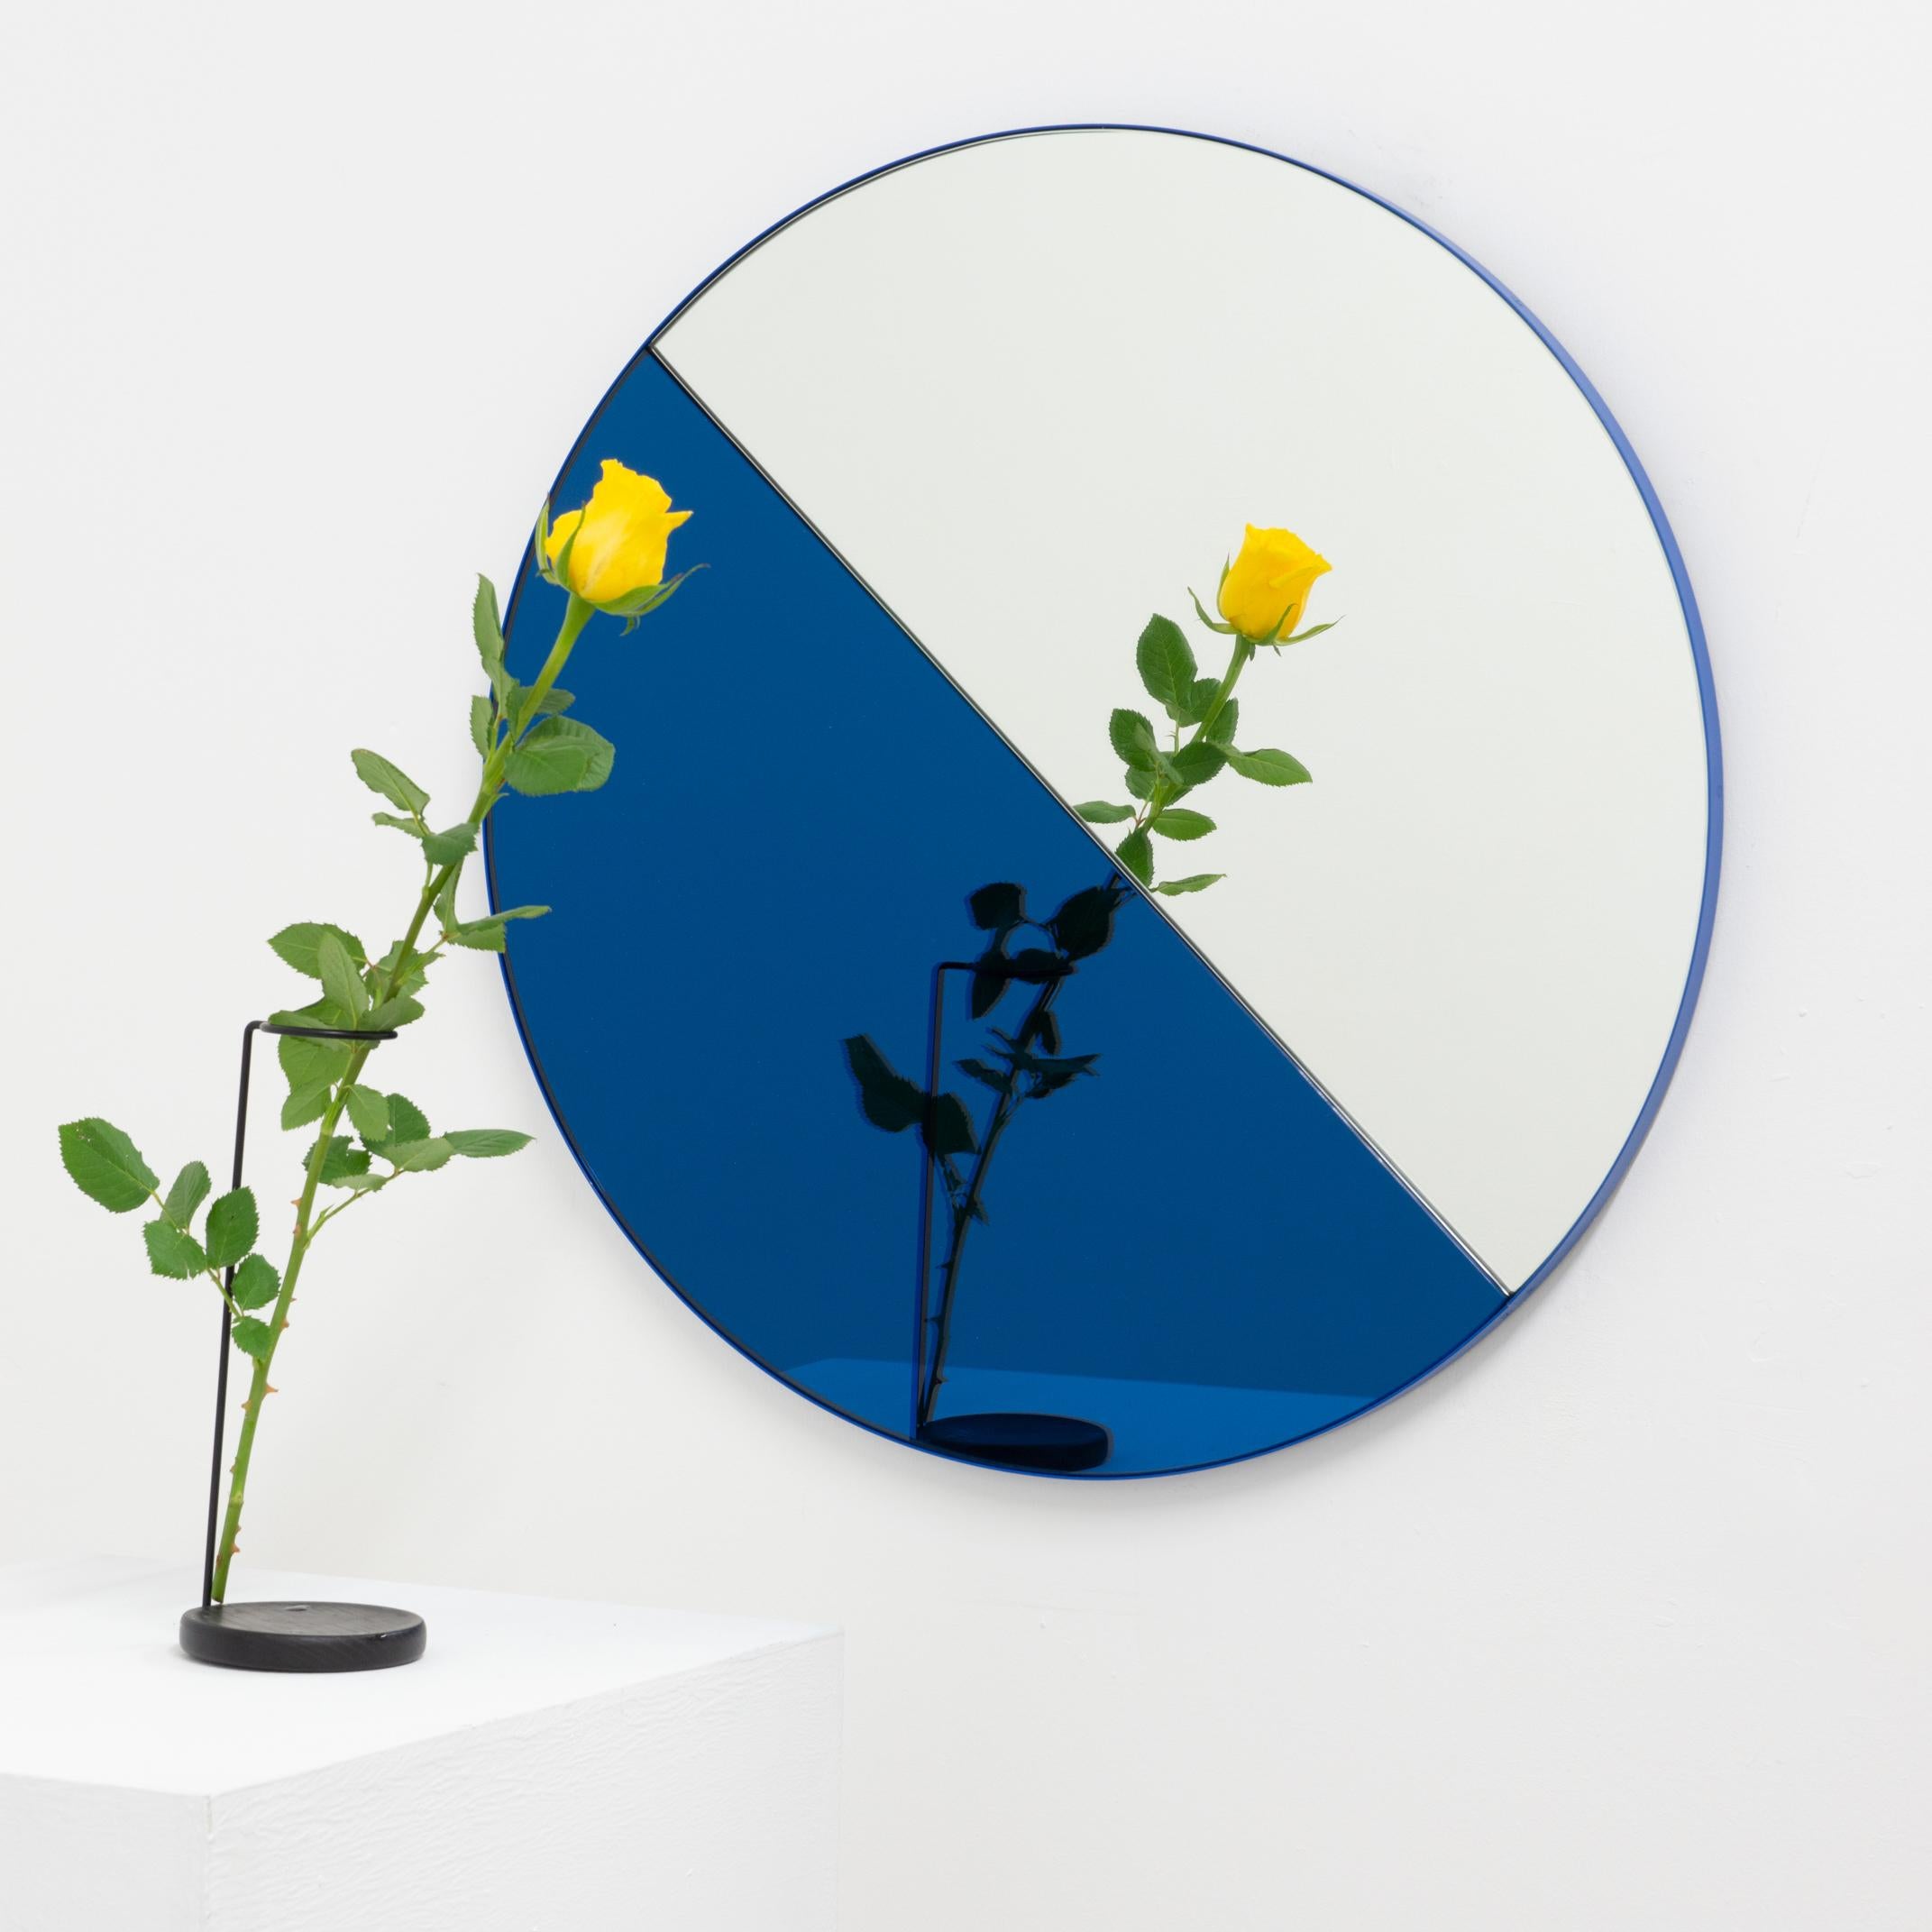 Contemporary mixed blue and silver mirror tints Dualis Orbis with an aluminium powder coated blue frame. Designed and handcrafted in London, UK.

All mirrors are fitted with an ingenious French cleat (split batten) system so they may hang flush with